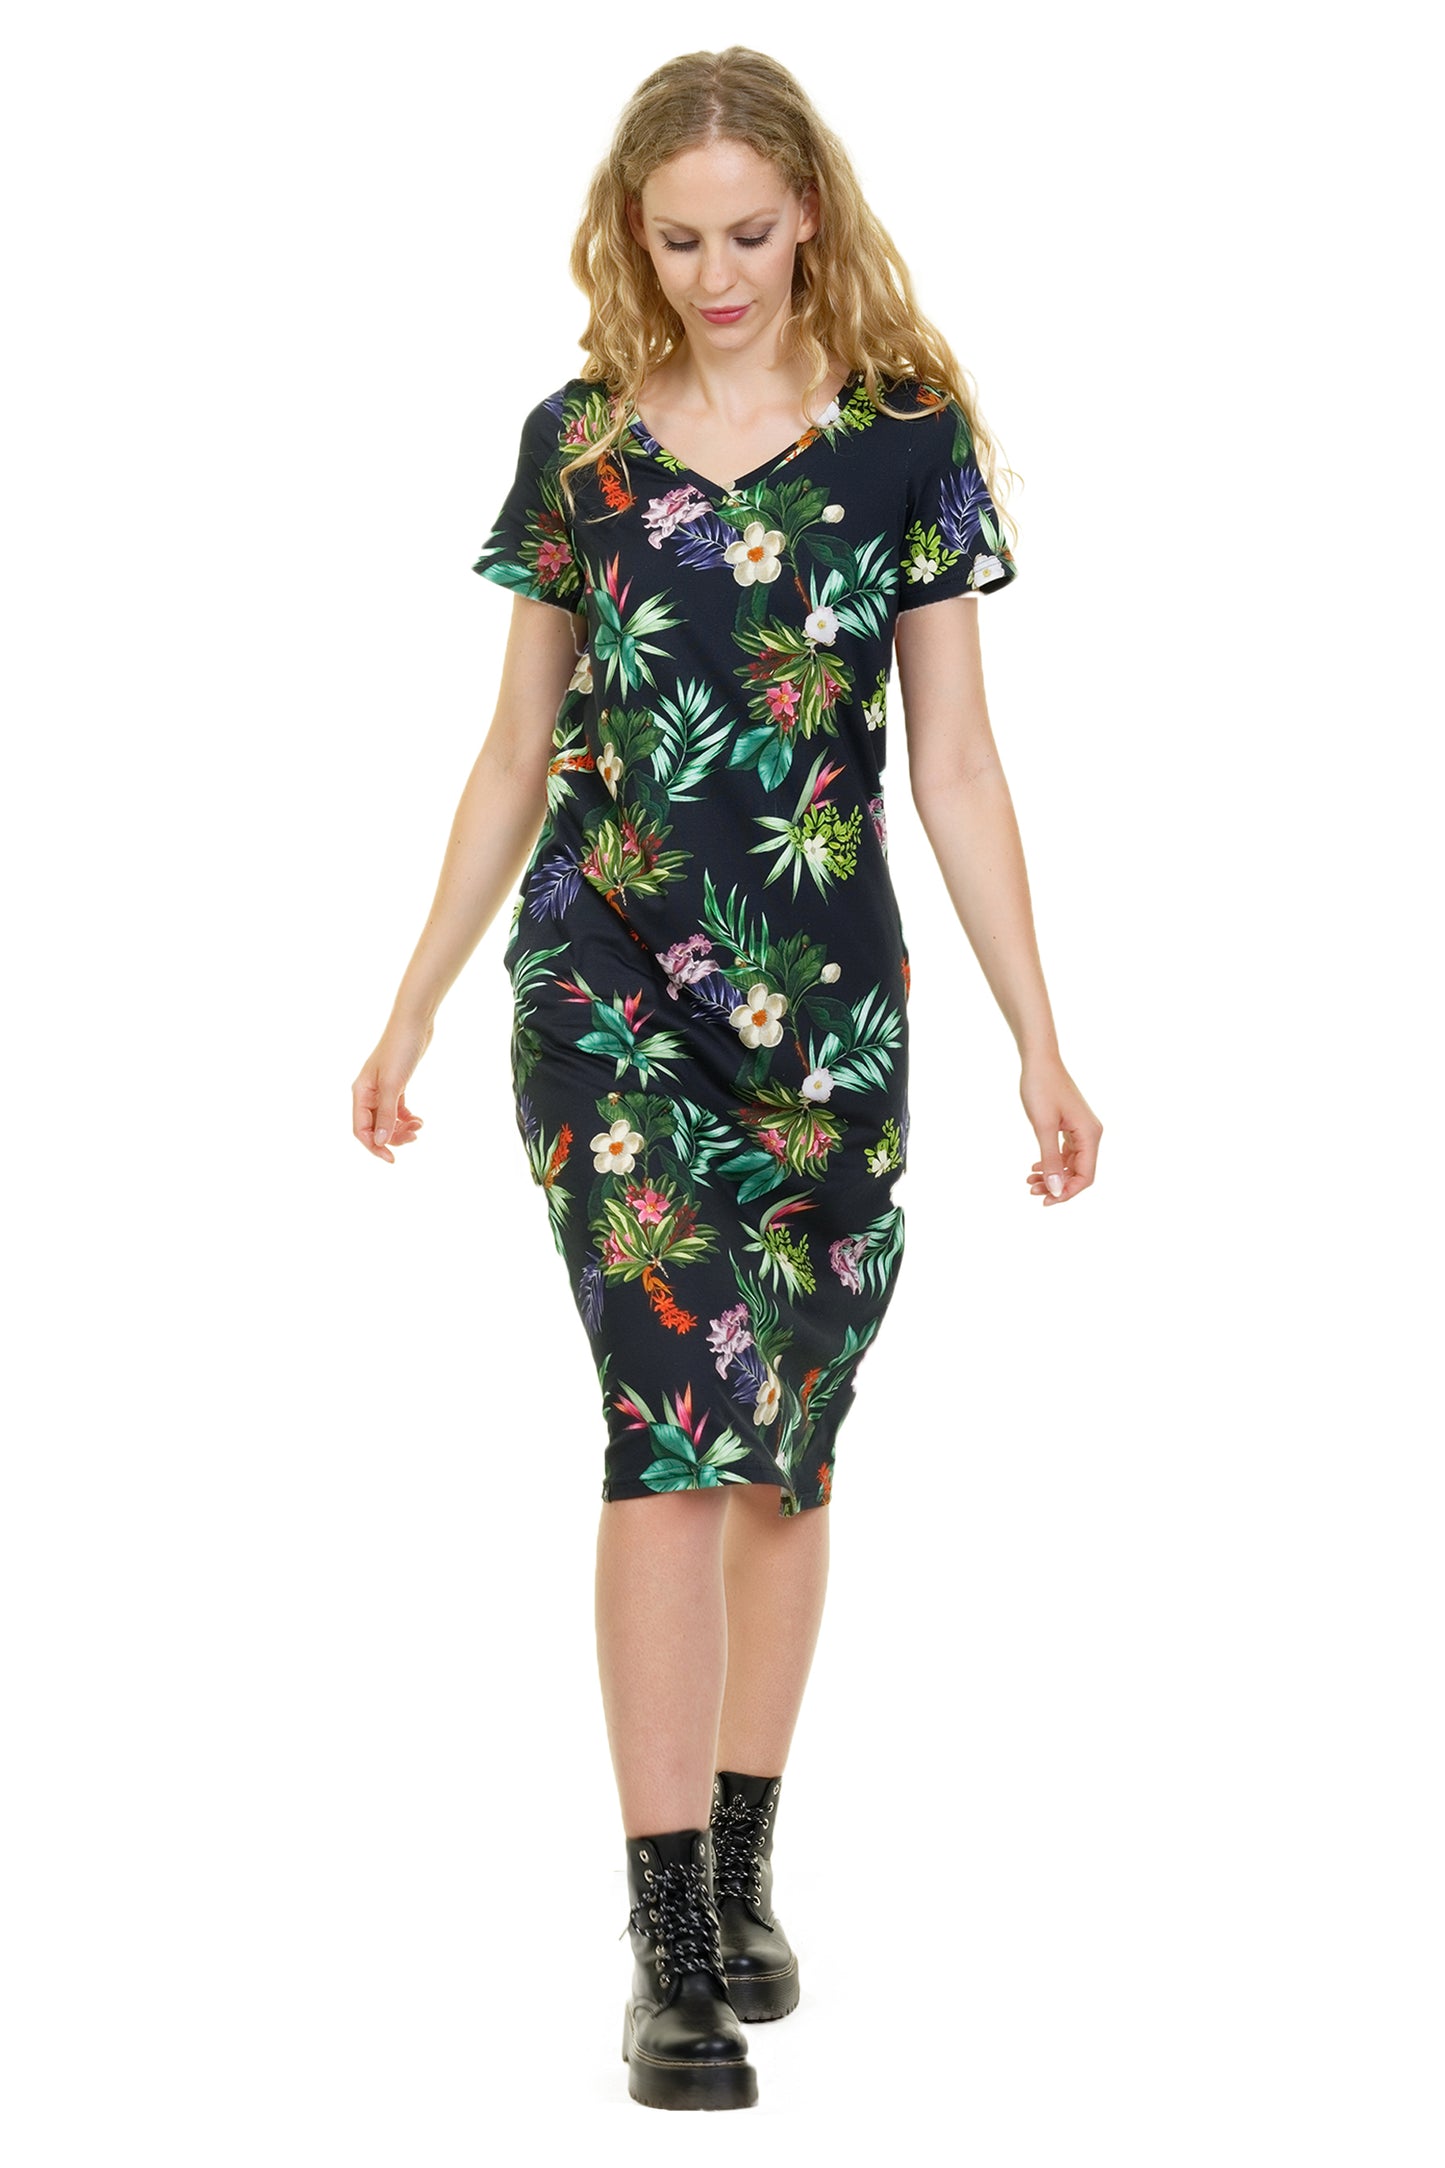 SALE Größe XS Relaxed Jersey Kleid lang Tropical